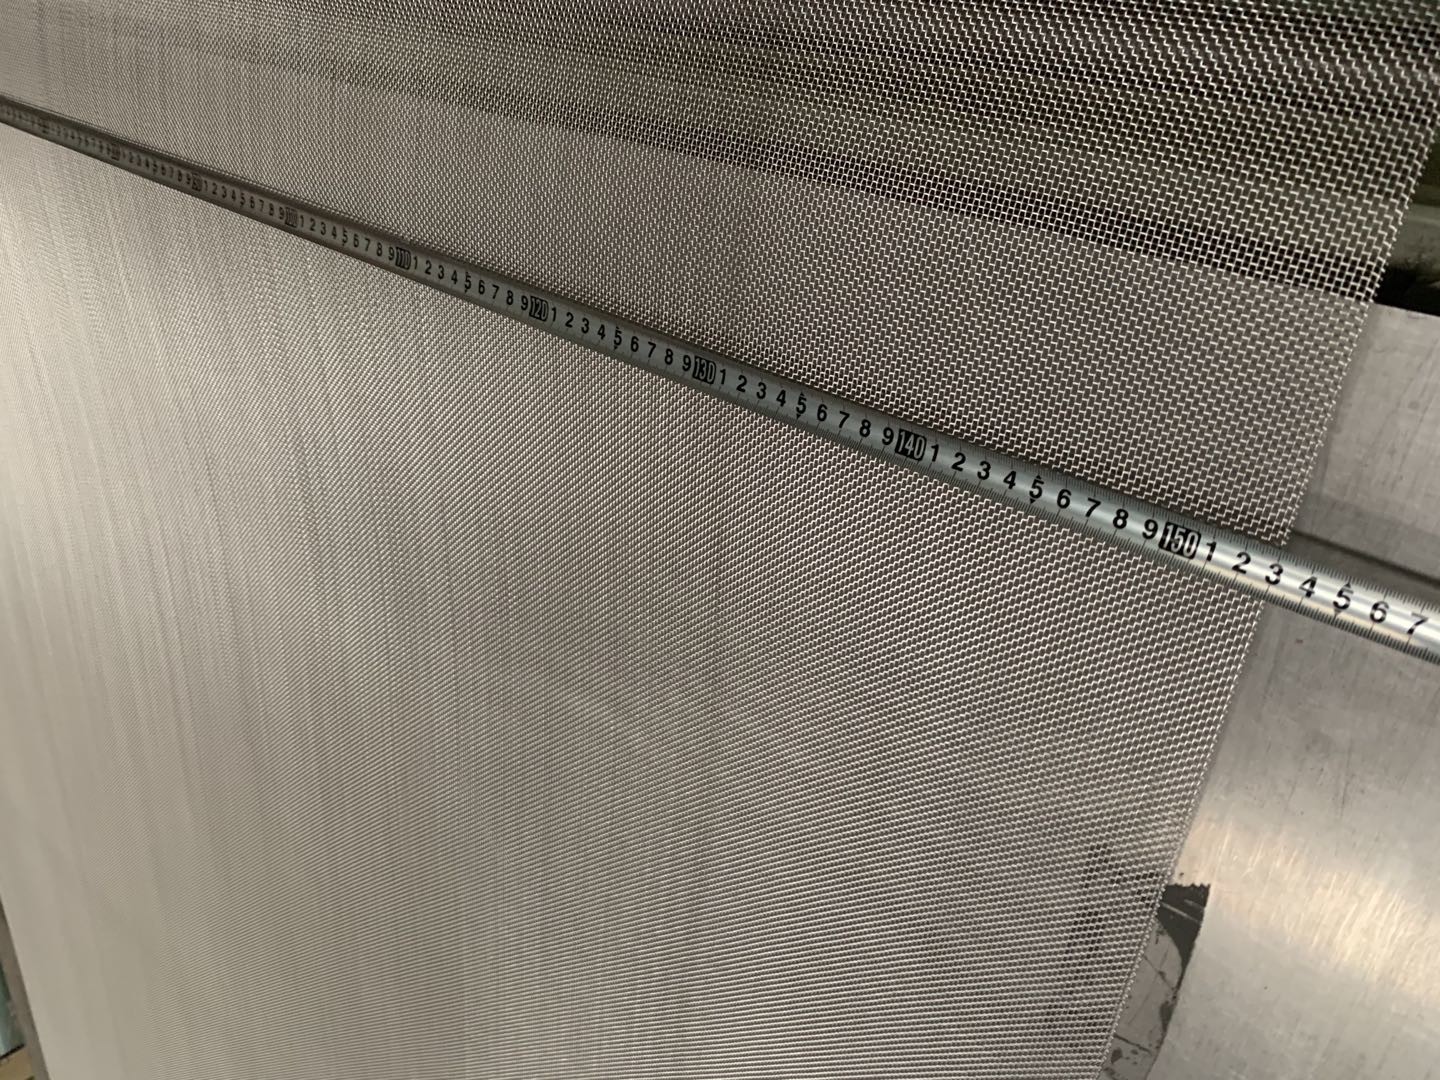 1.22meter width smooth surface Chemical Filter Stainless Steel Screen Mesh